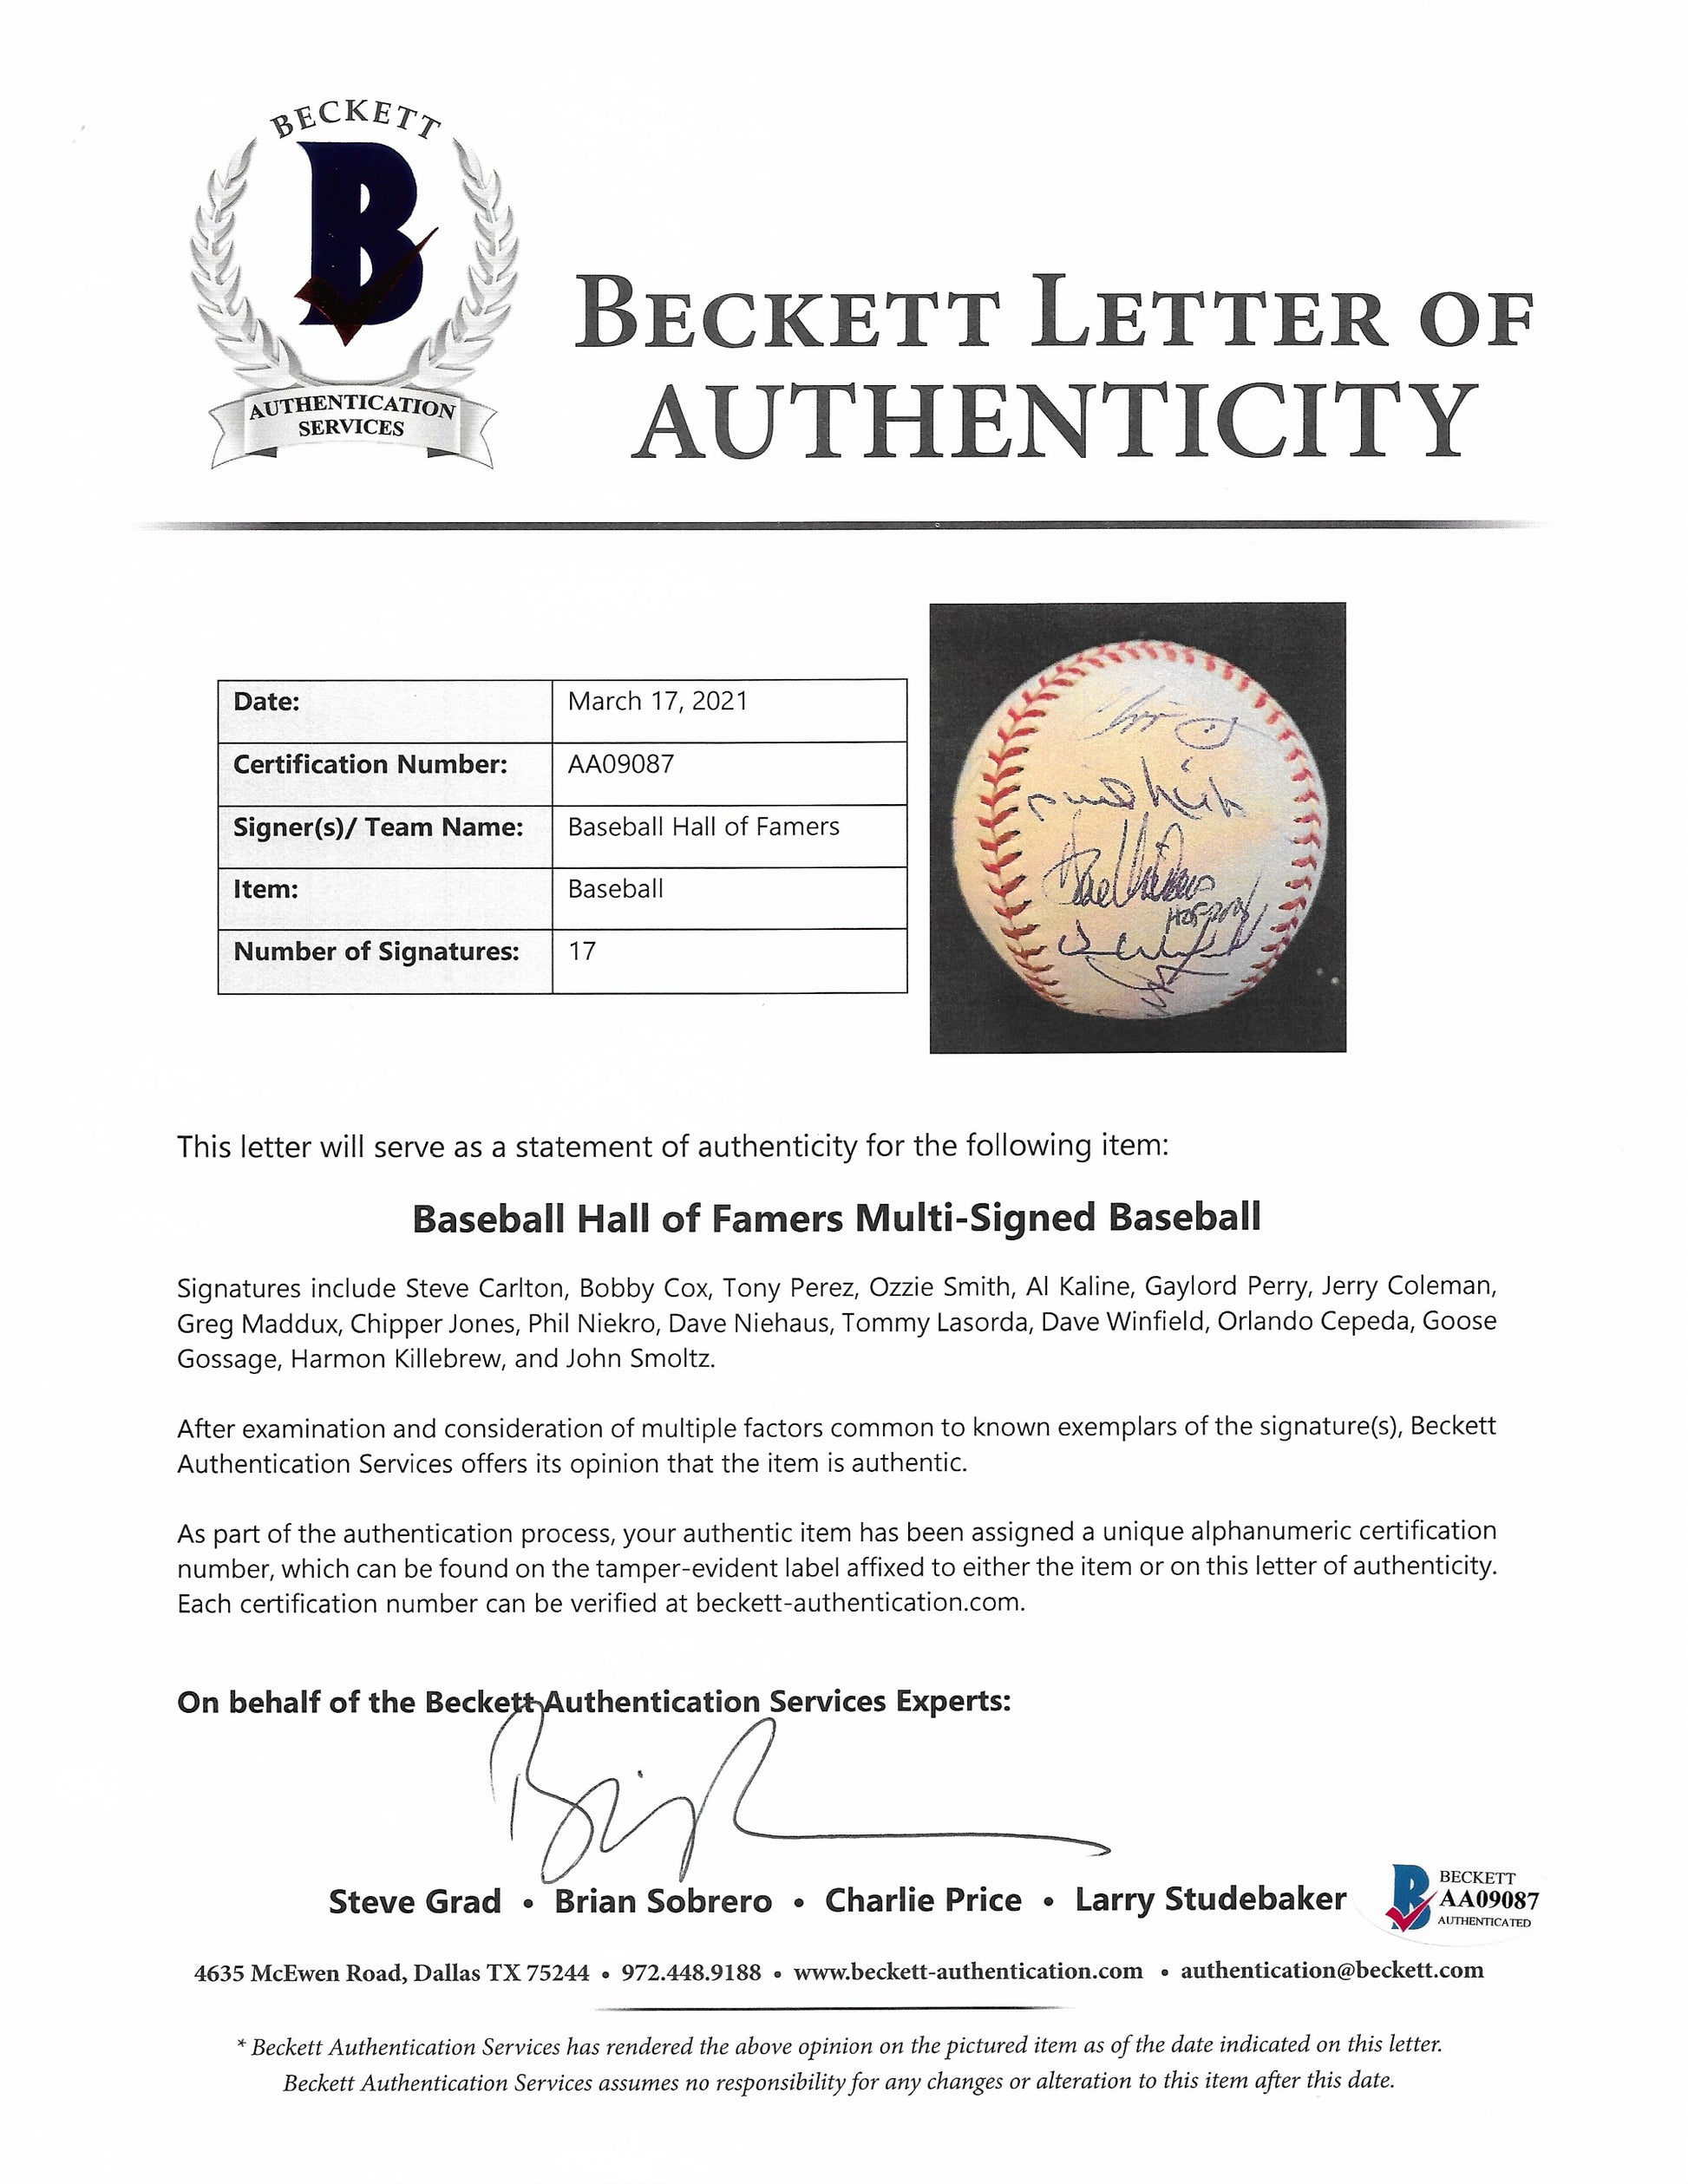 Online Memorabilia Authentication Service - Hall of Fame Card